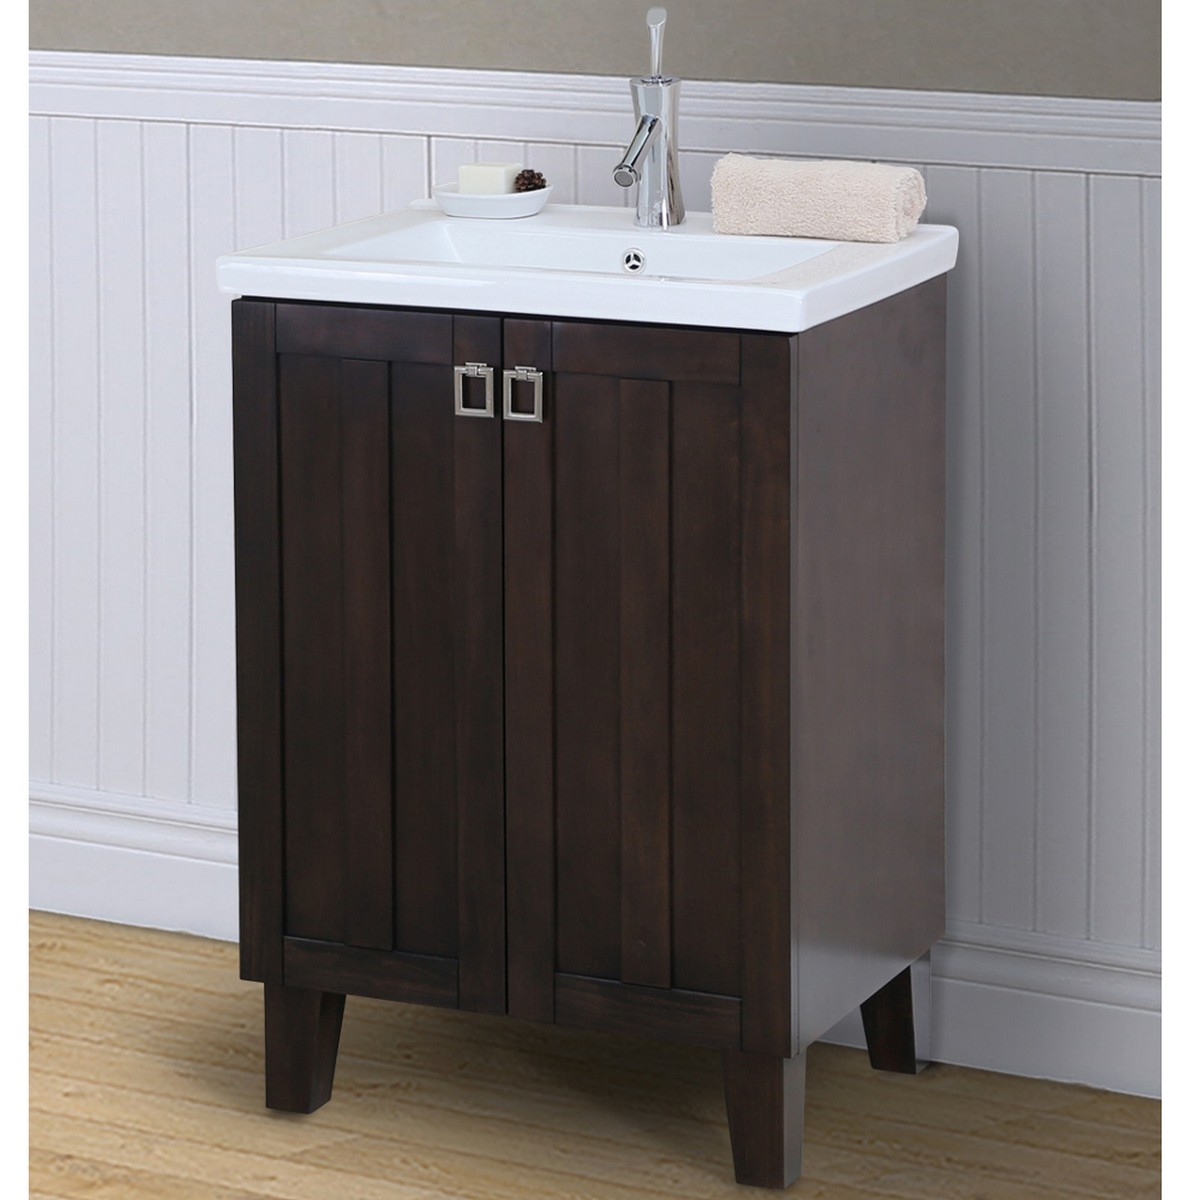 INFURNITURE IN3724-BR 24 INCH SINGLE SINK BATHROOM VANITY IN BROWN WITH THICK EDGE CERAMIC TOP